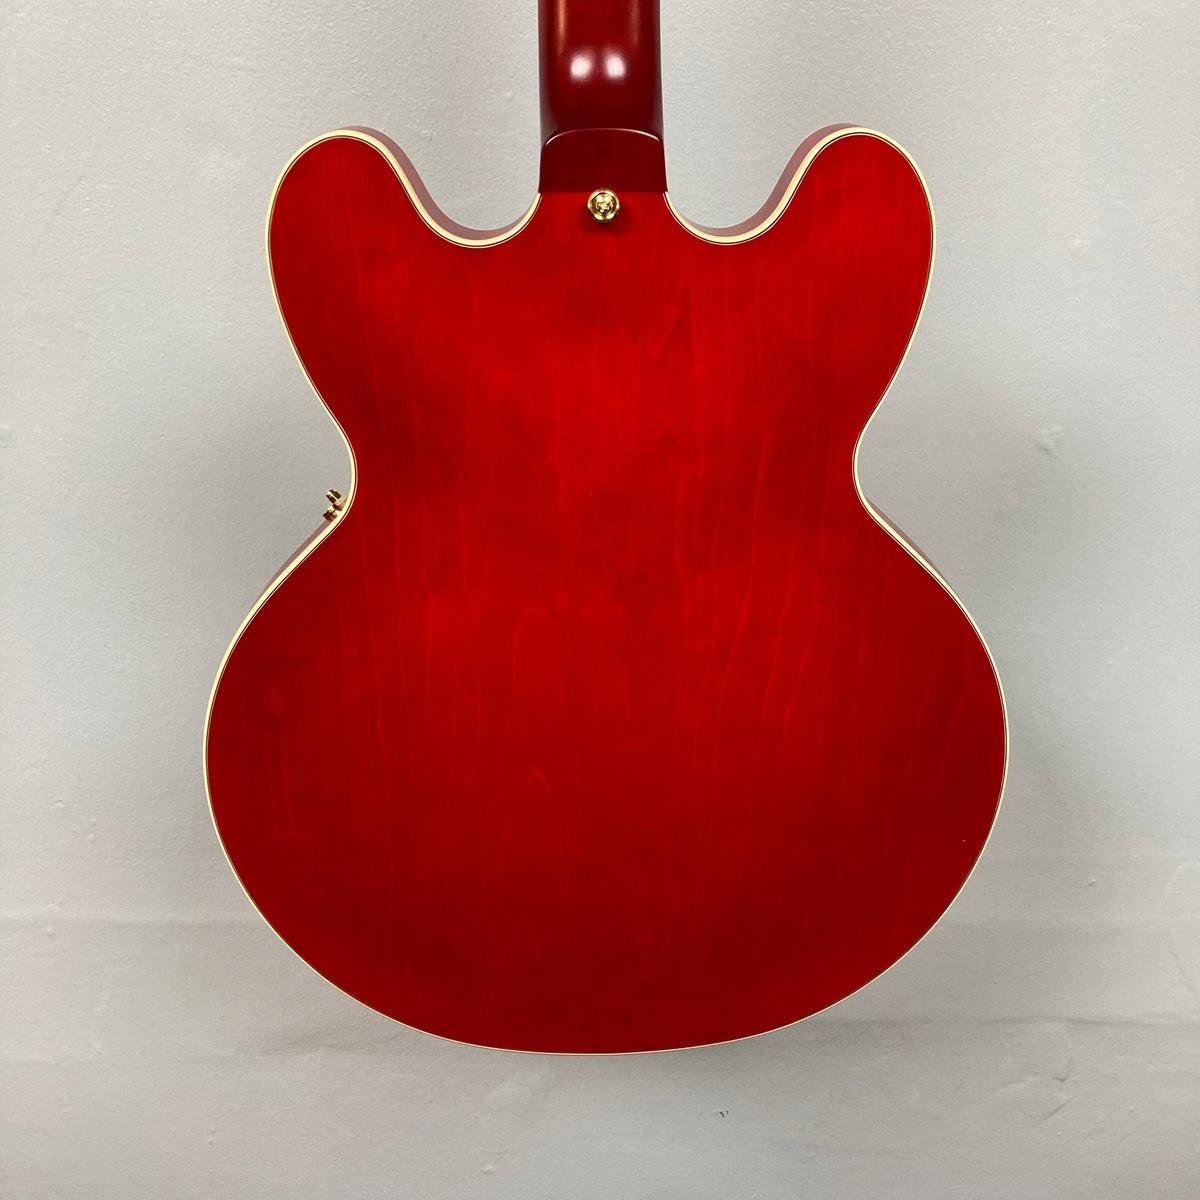 Epiphone IGC 1959 ES-355 Cherry Red Electric Guitar